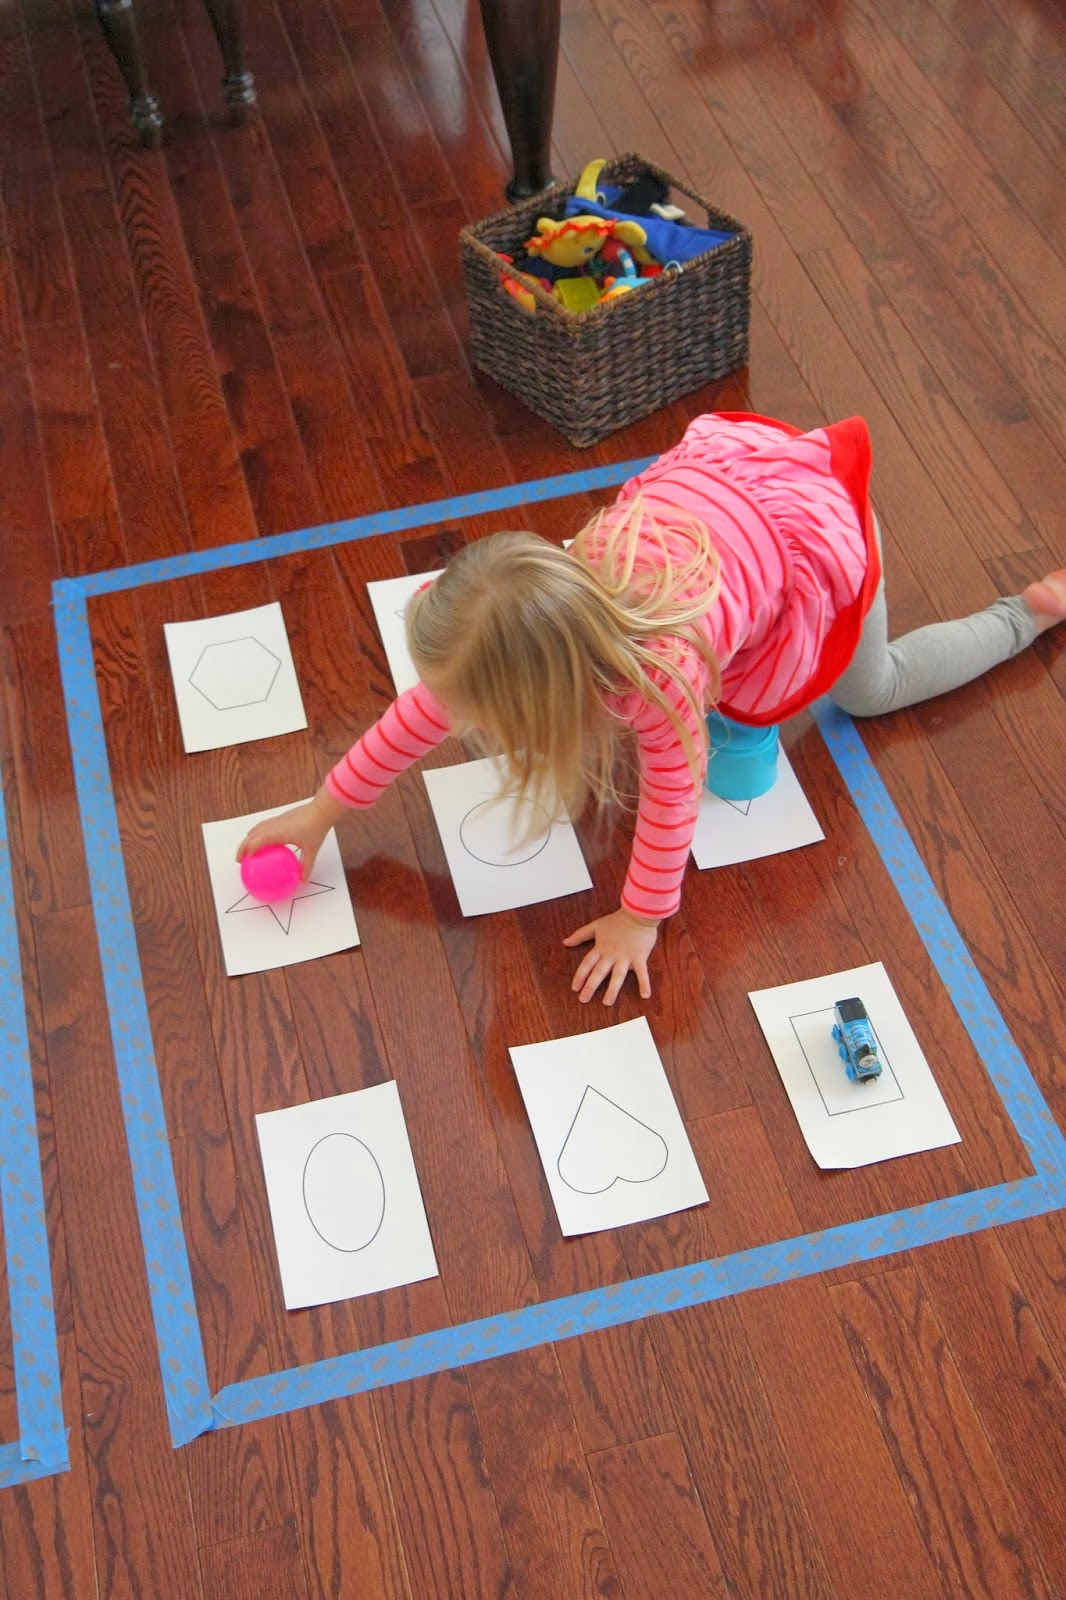 Toddler Approved!: 25+ Shape Activities and Crafts for Kids